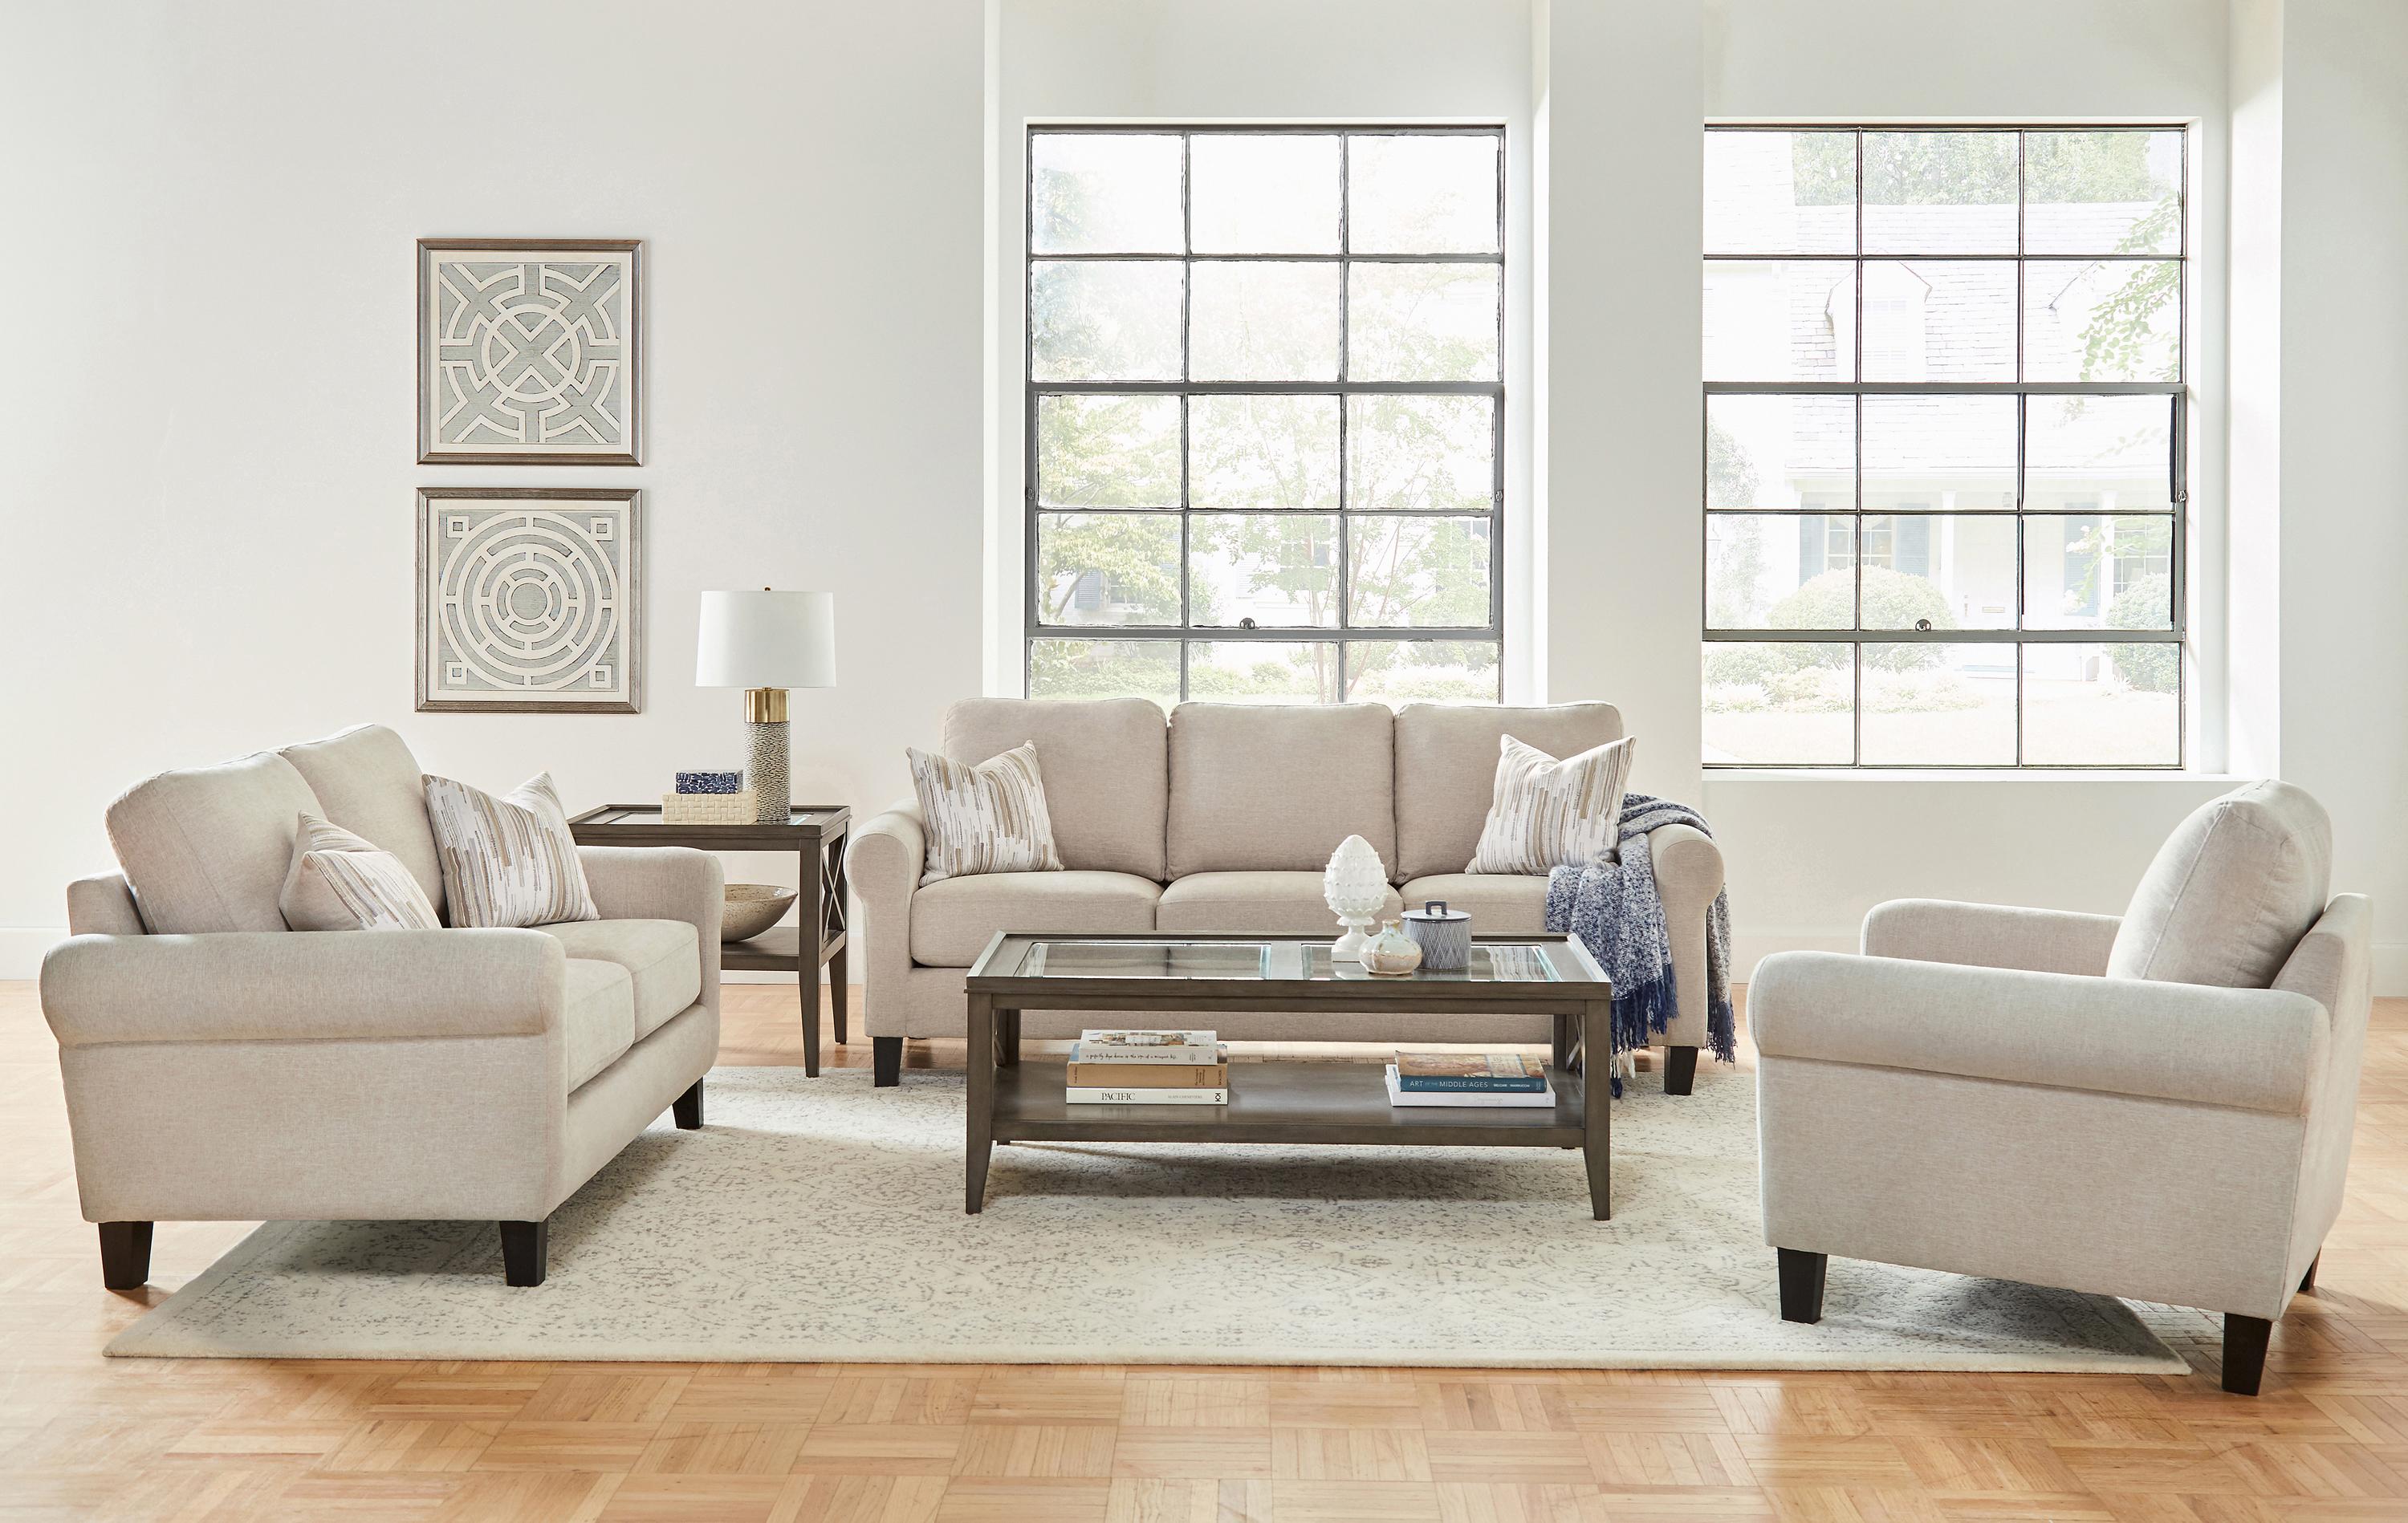 Transitional Living Room Set 509781-S2 Nadine 509781-S2 in Oatmeal Chenille